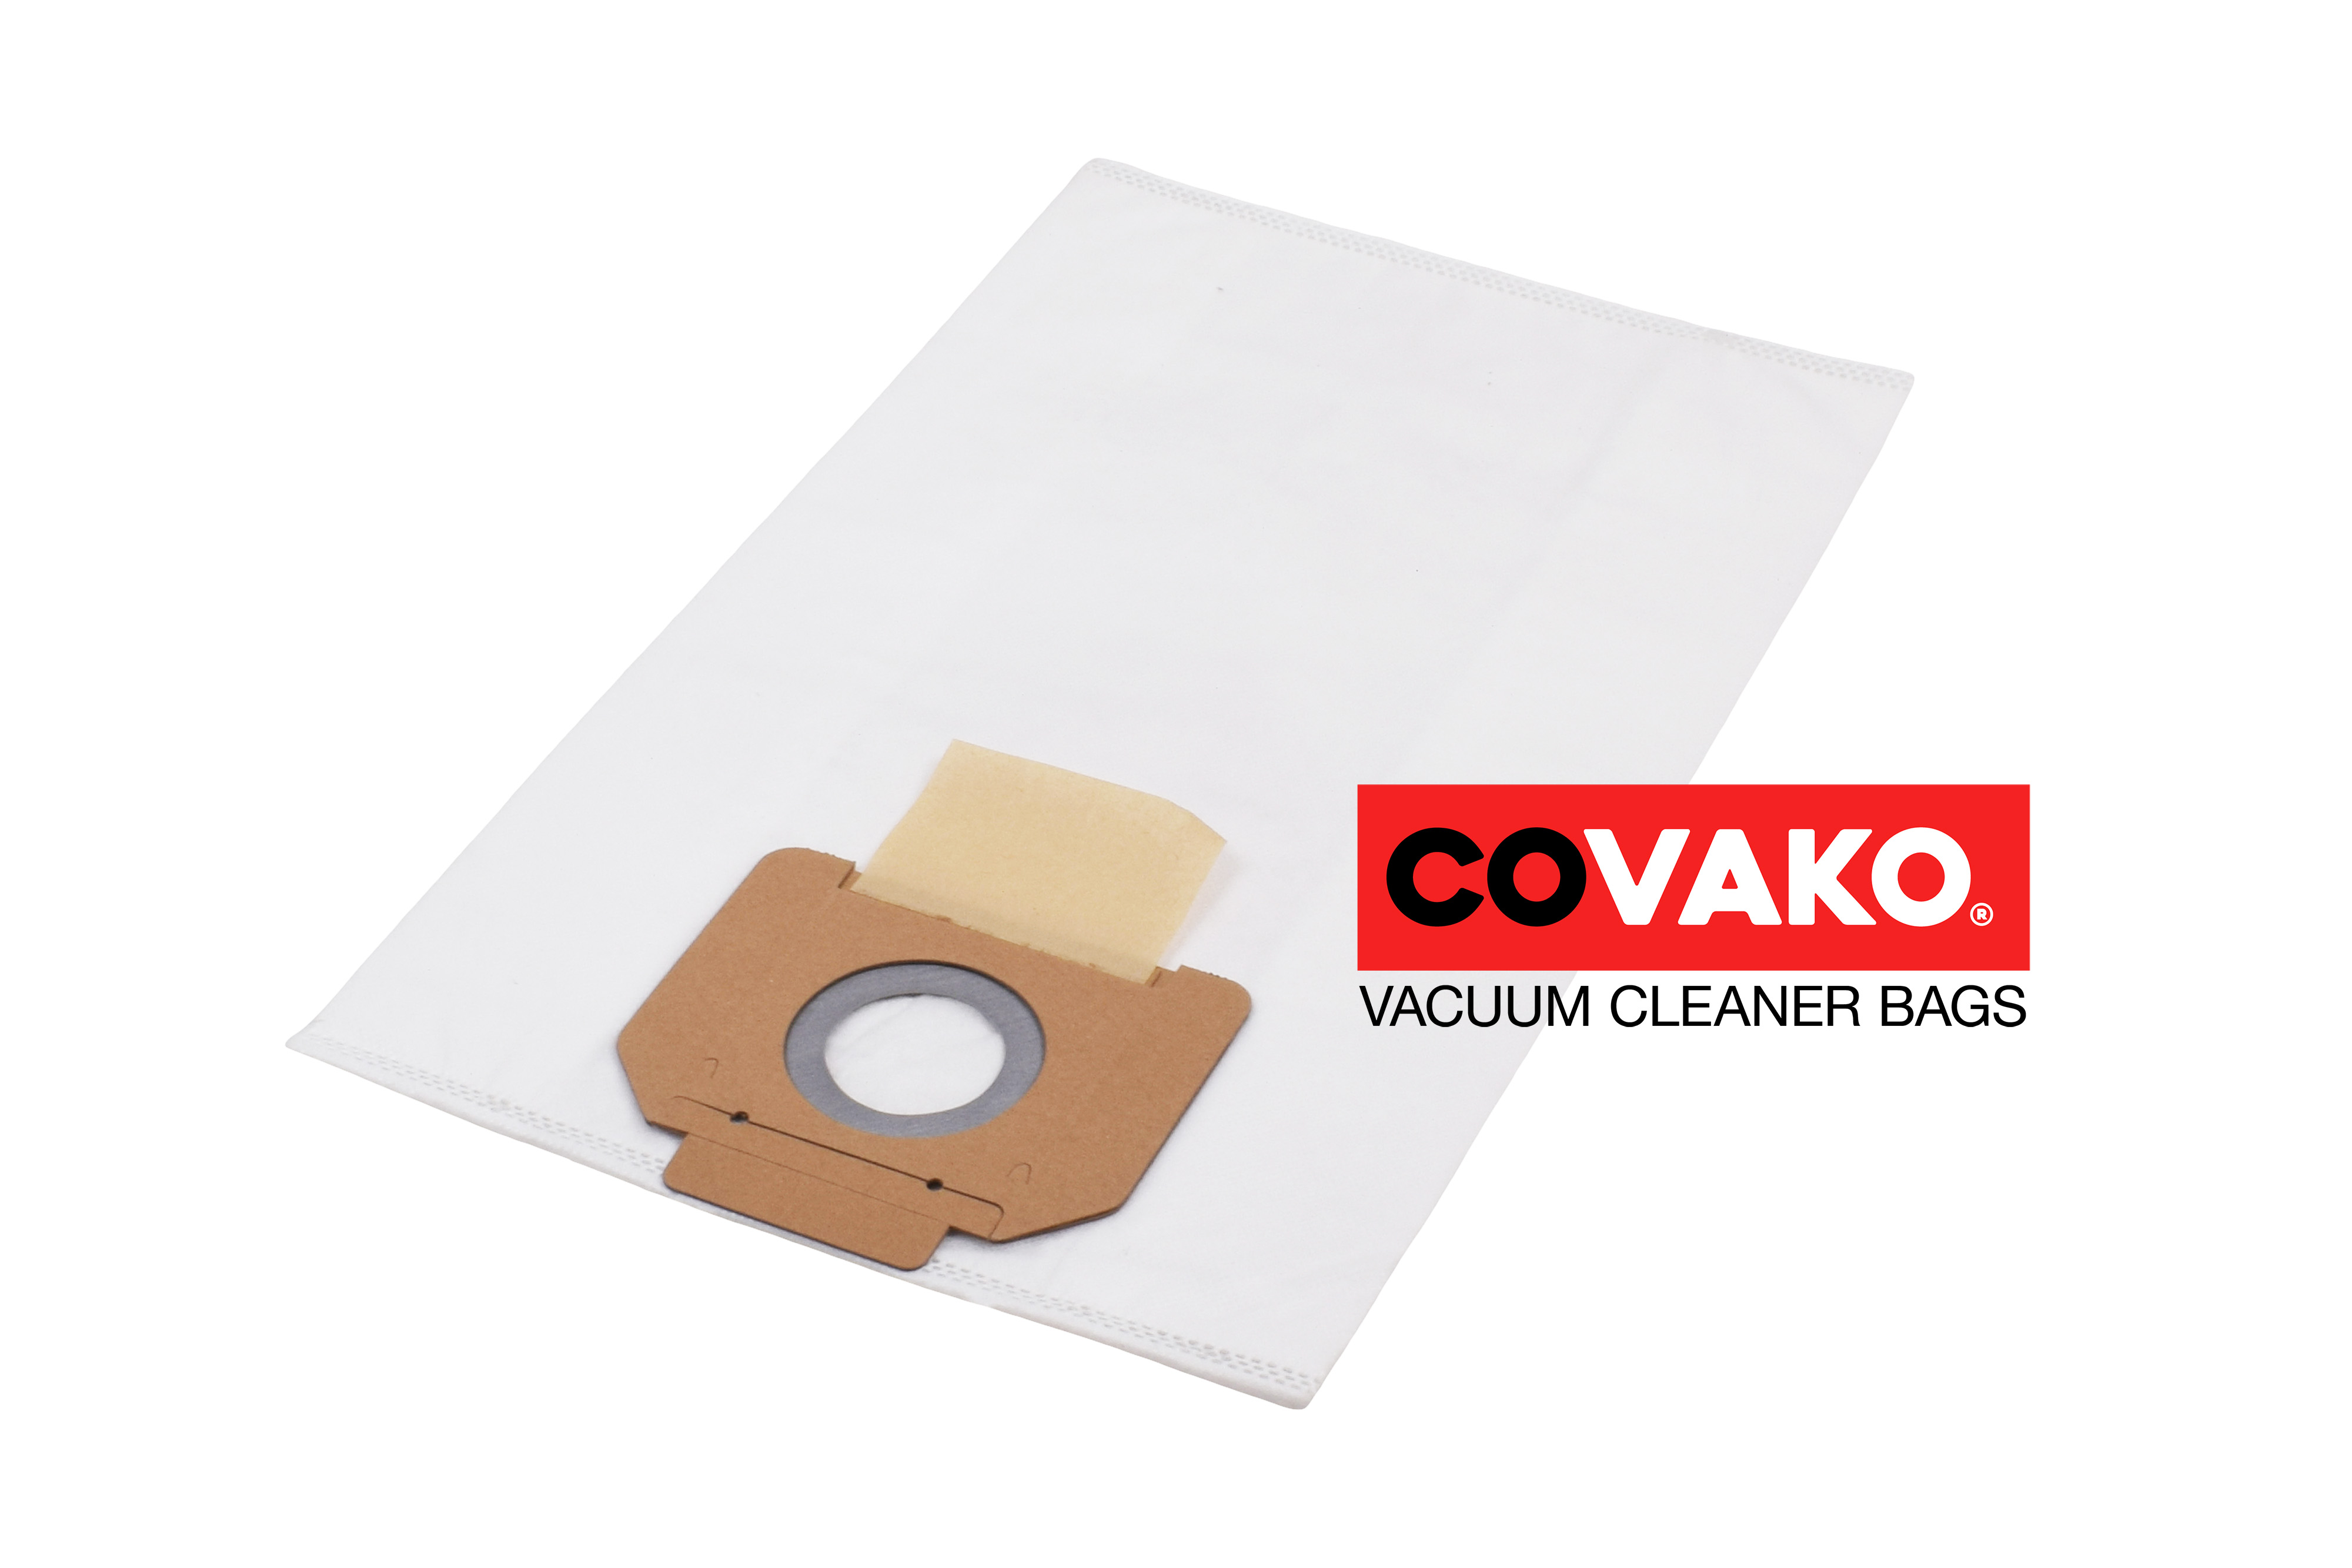 DiBo Windly 215 IPC / Synthesis - DiBo vacuum cleaner bags